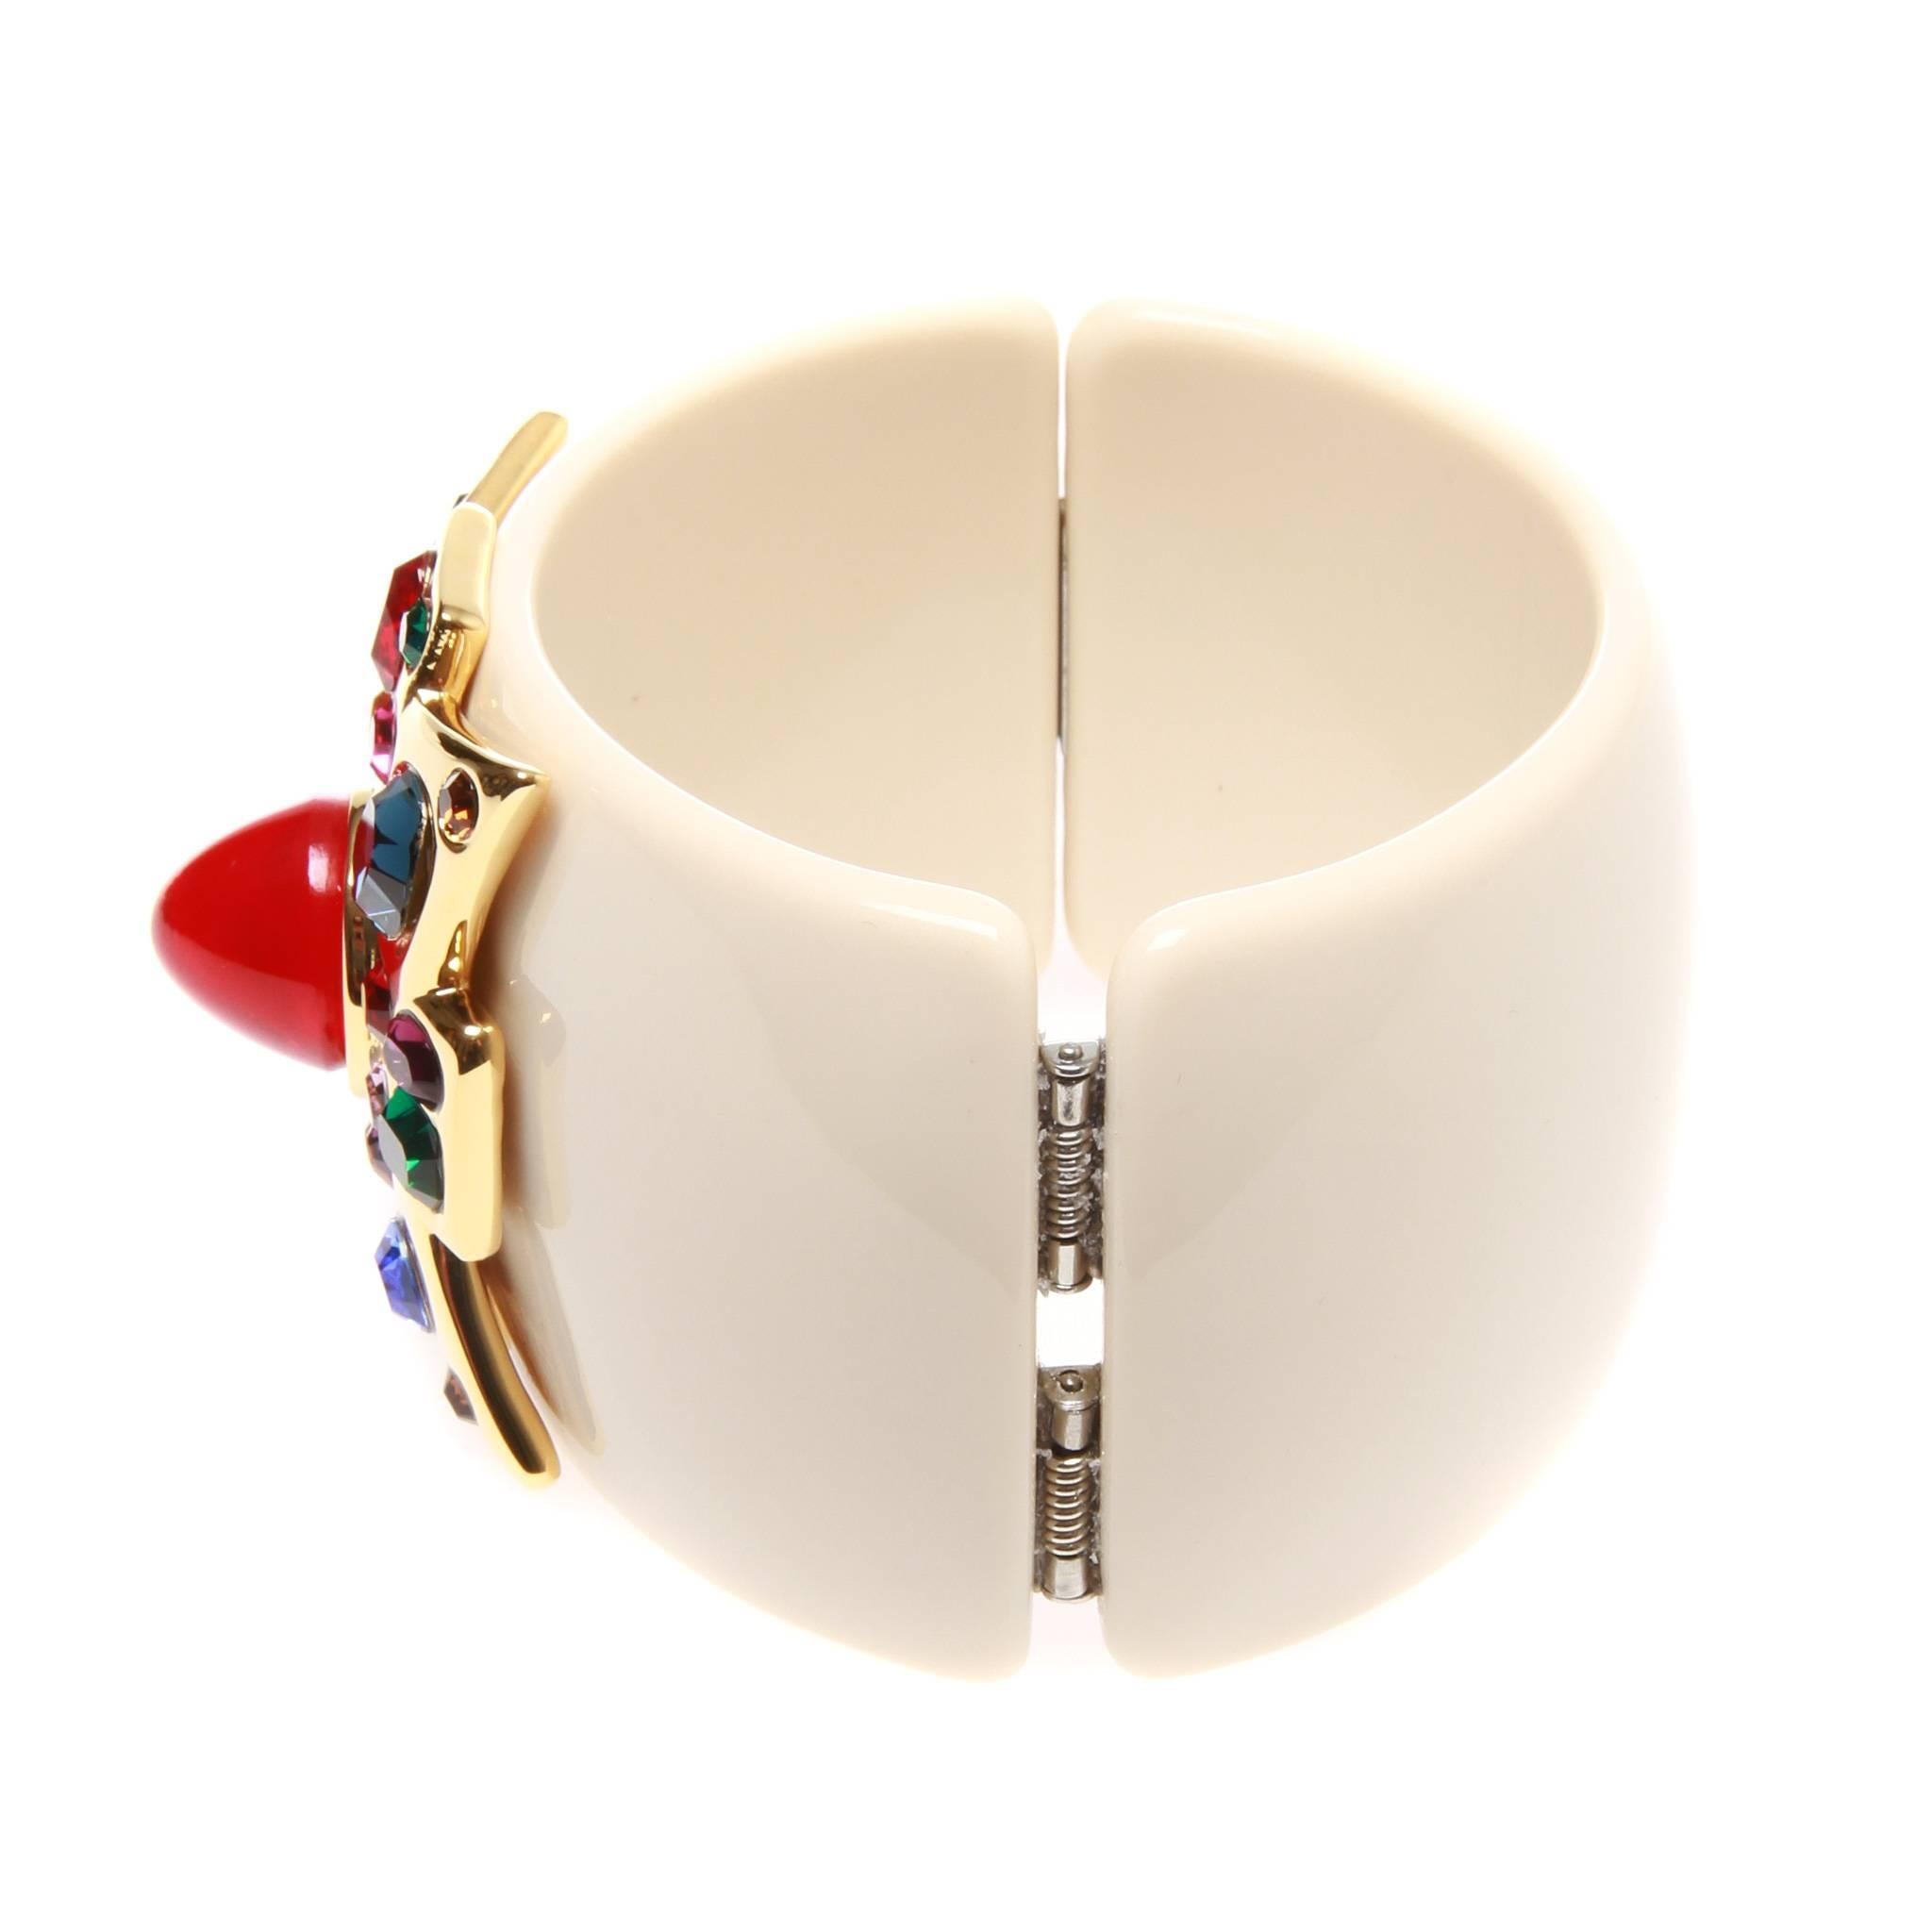 Kenneth Jay Lane cuff in white resin featuring a gold-tone Maltese cross embellished with multi-coloured glass stones. Magnetic closure.